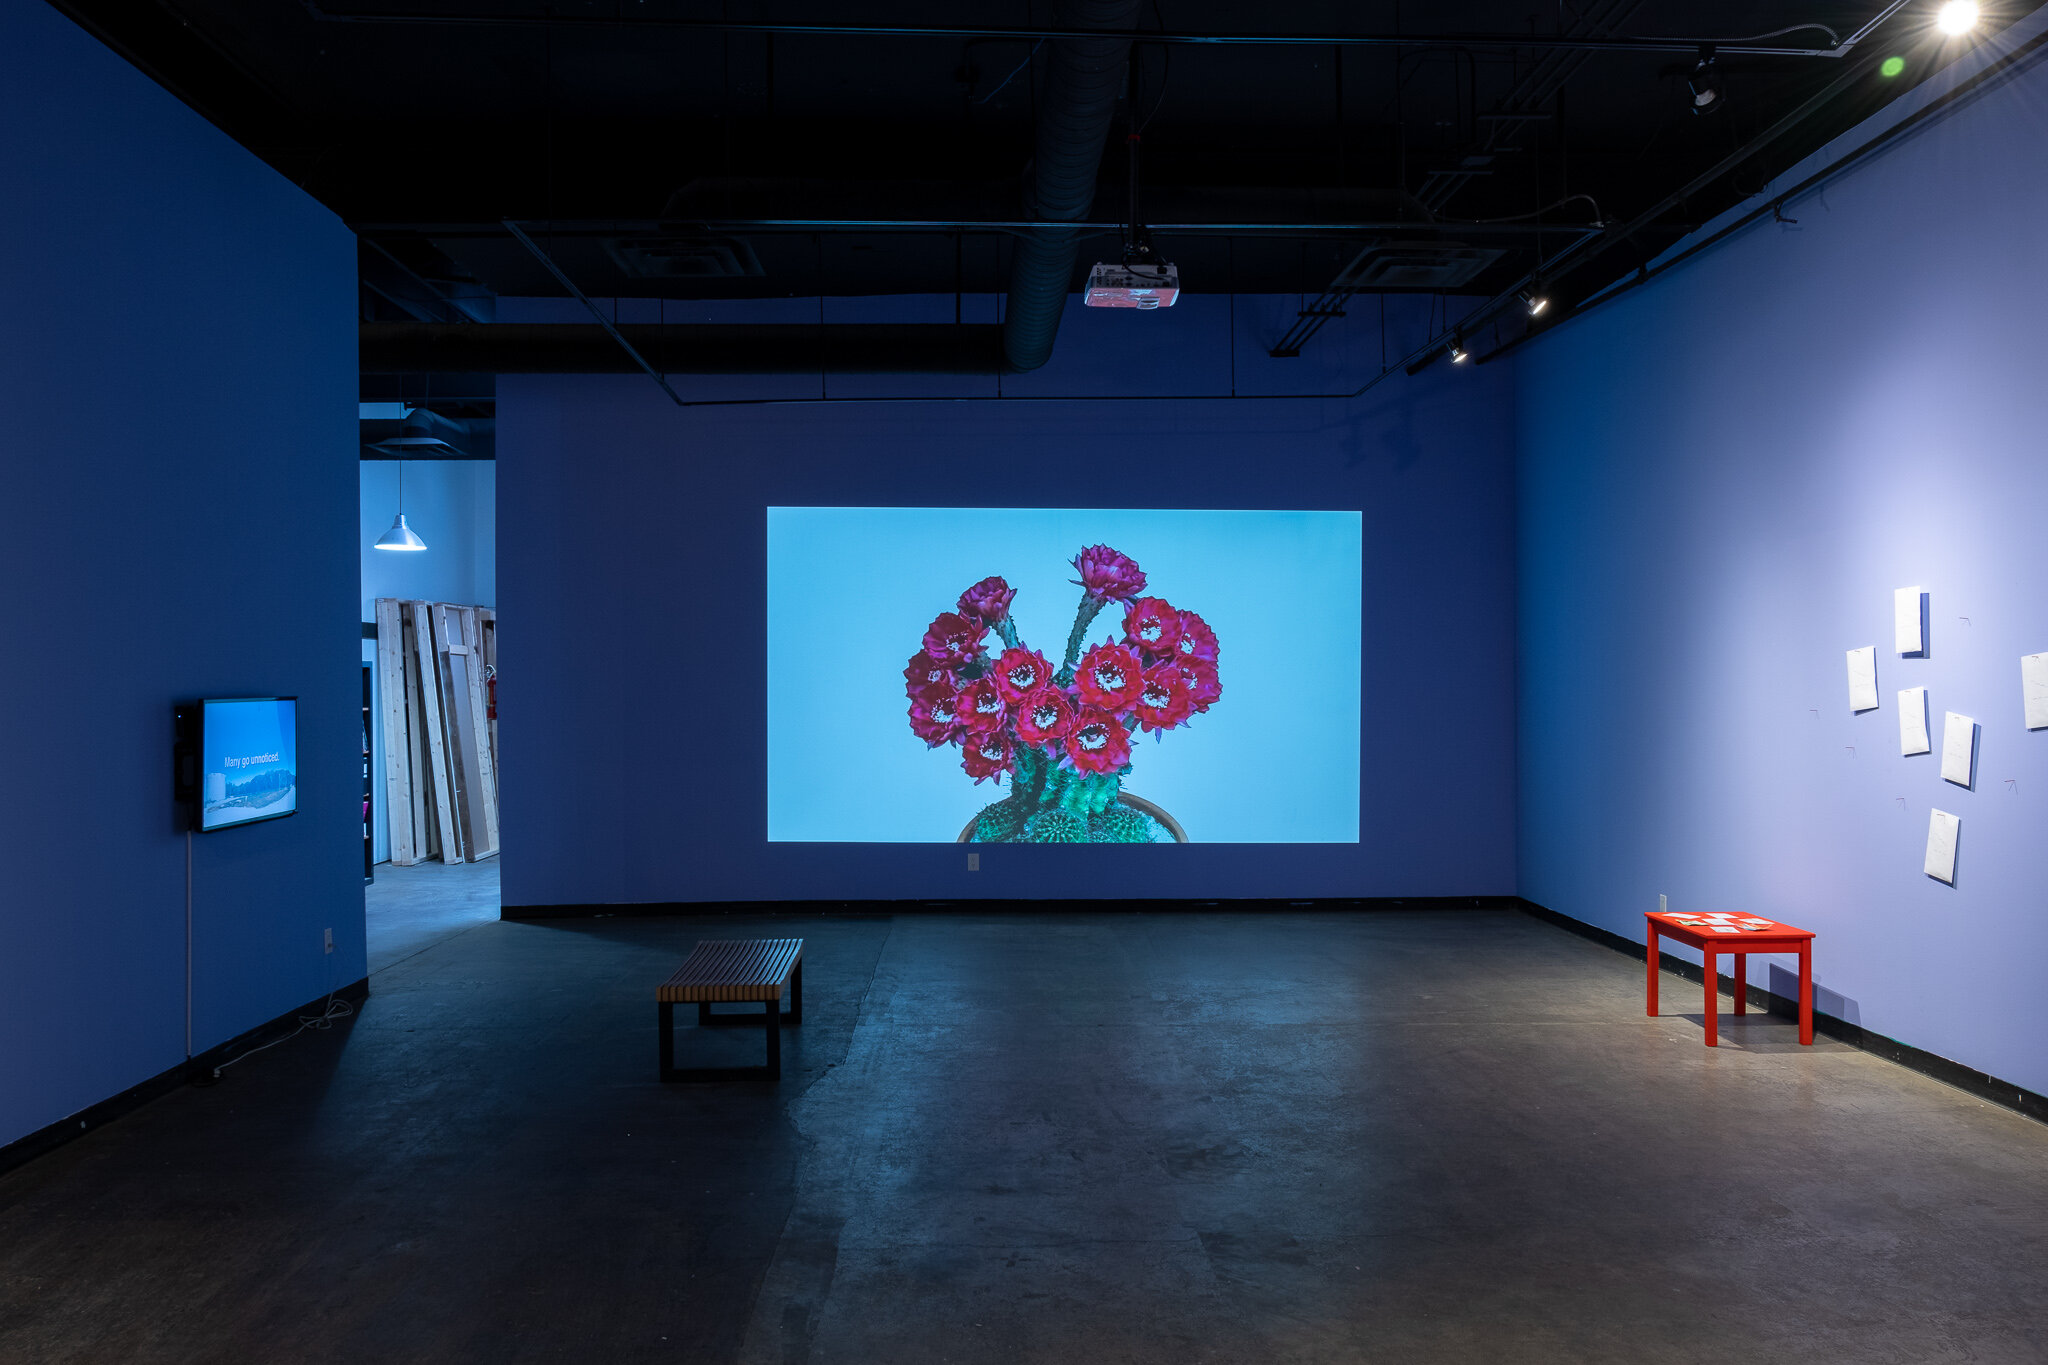  We are looking into one of the gallery spaces for the exhibition “Even the Birds are Walking”. Straight ahead of us, there is a projection showing a bundle of red and pink flowers wilting against a white background. To our left, there is a small scr